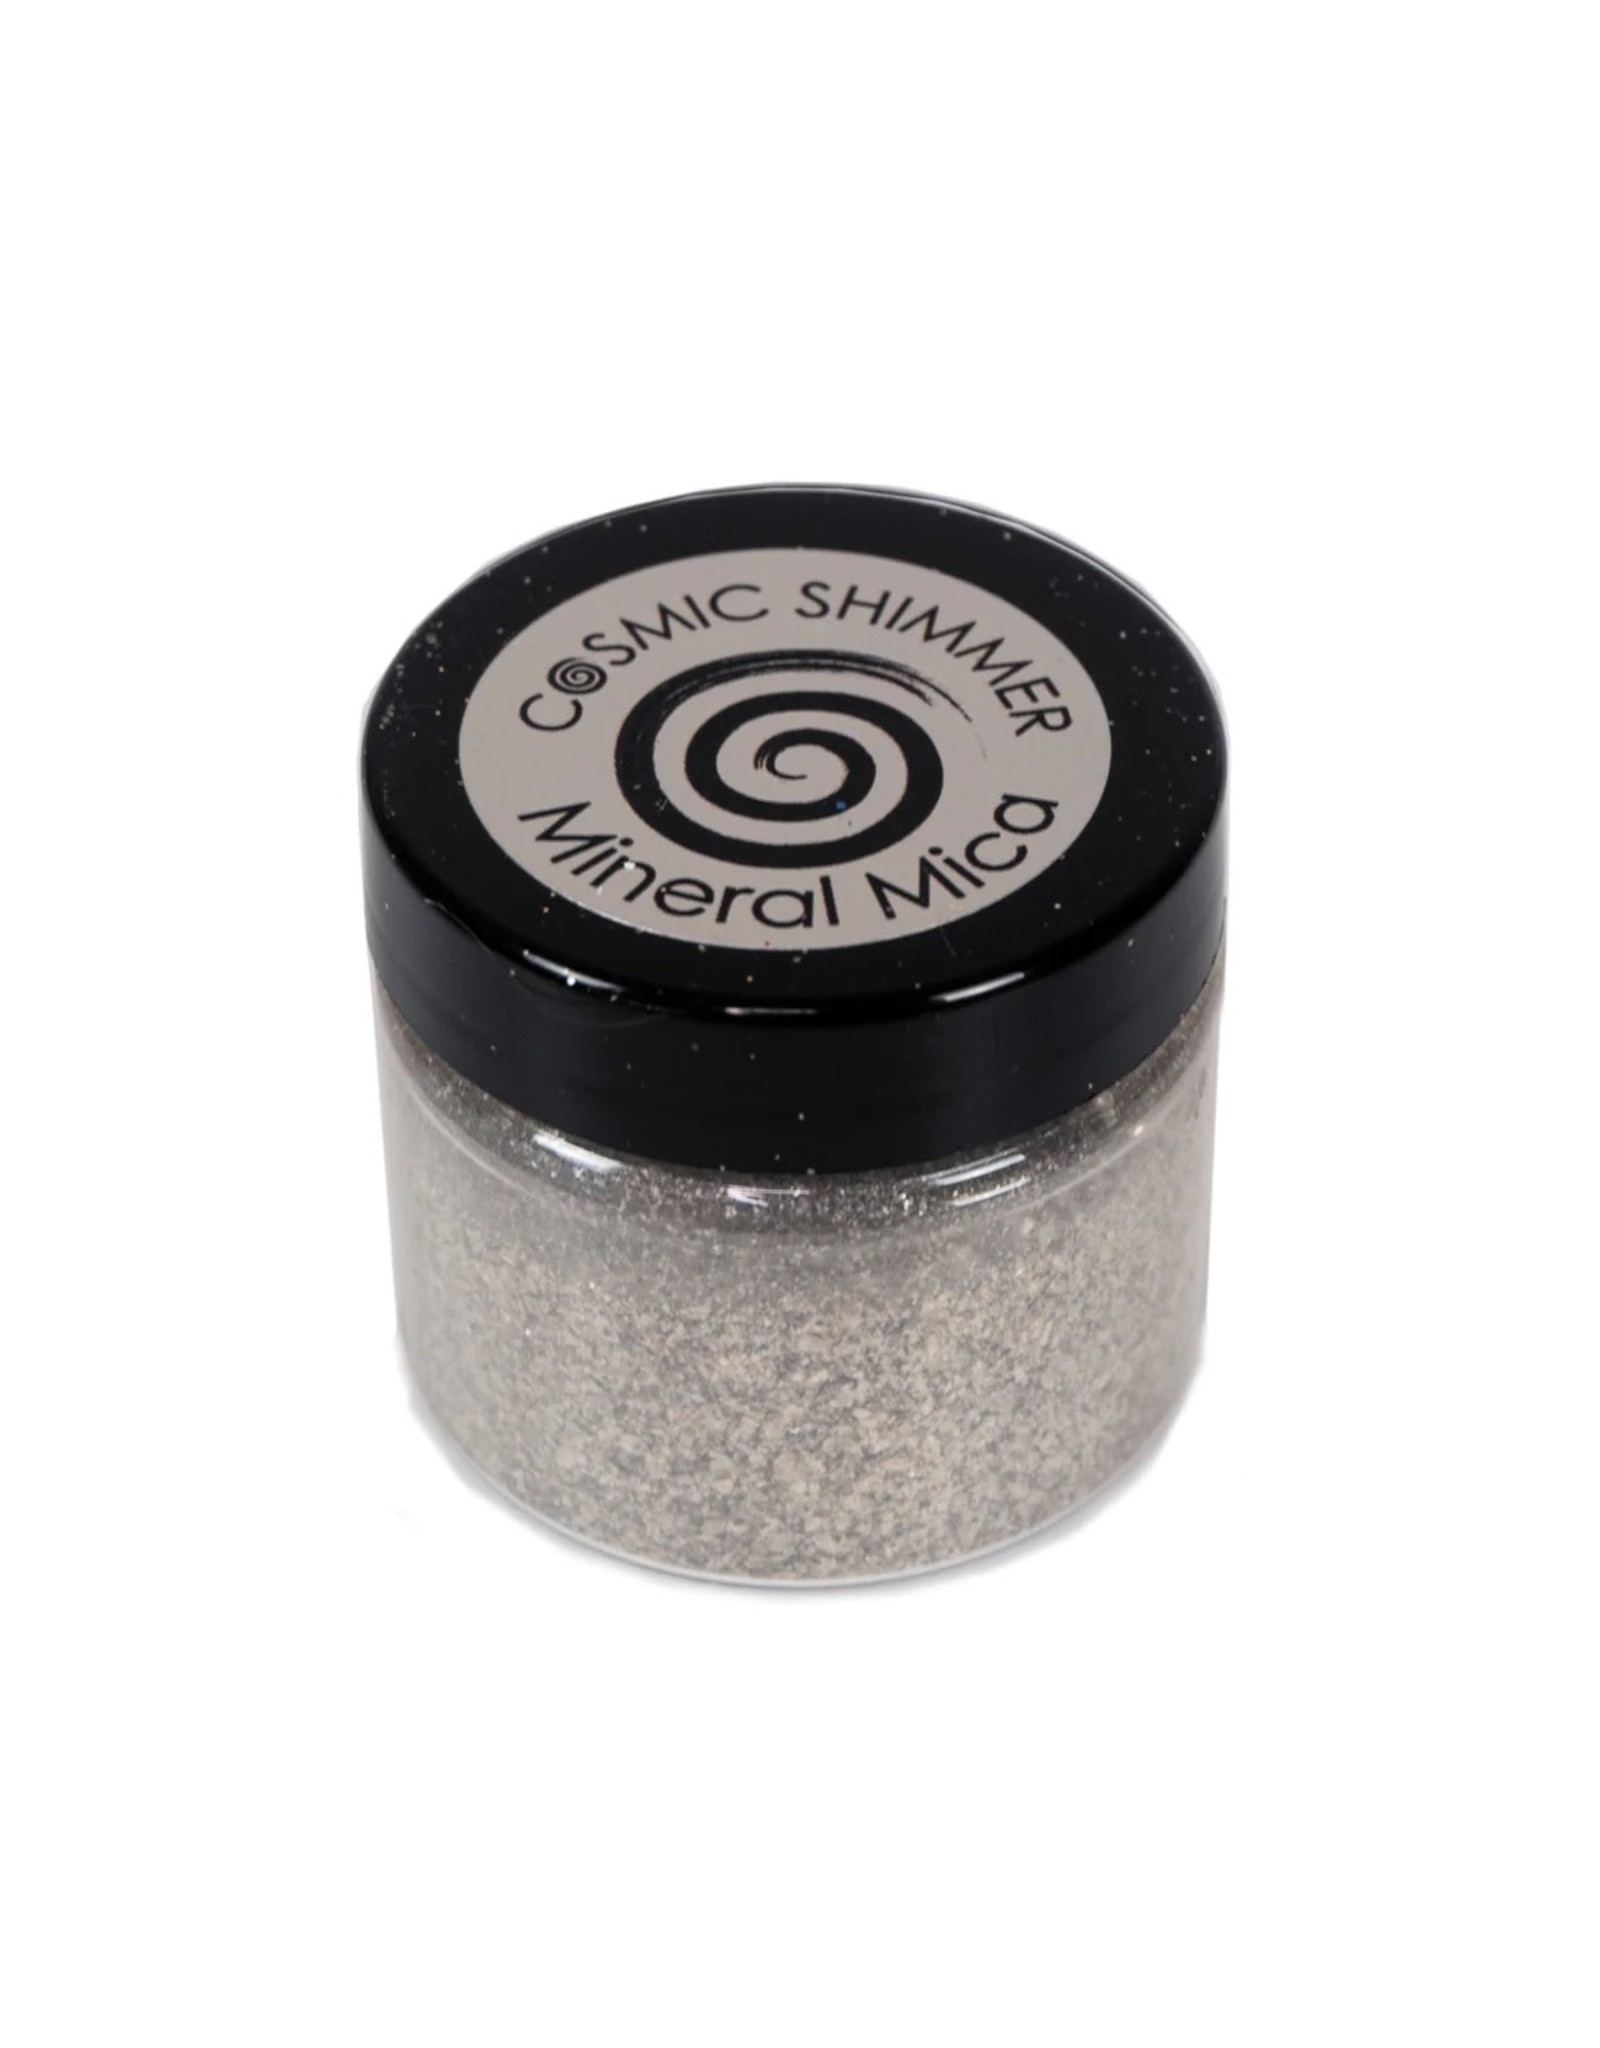 CREATIVE EXPRESSIONS CREATIVE EXPRESSIONS COSMIC SHIMMER BIANCO SILVER MINERAL MICA